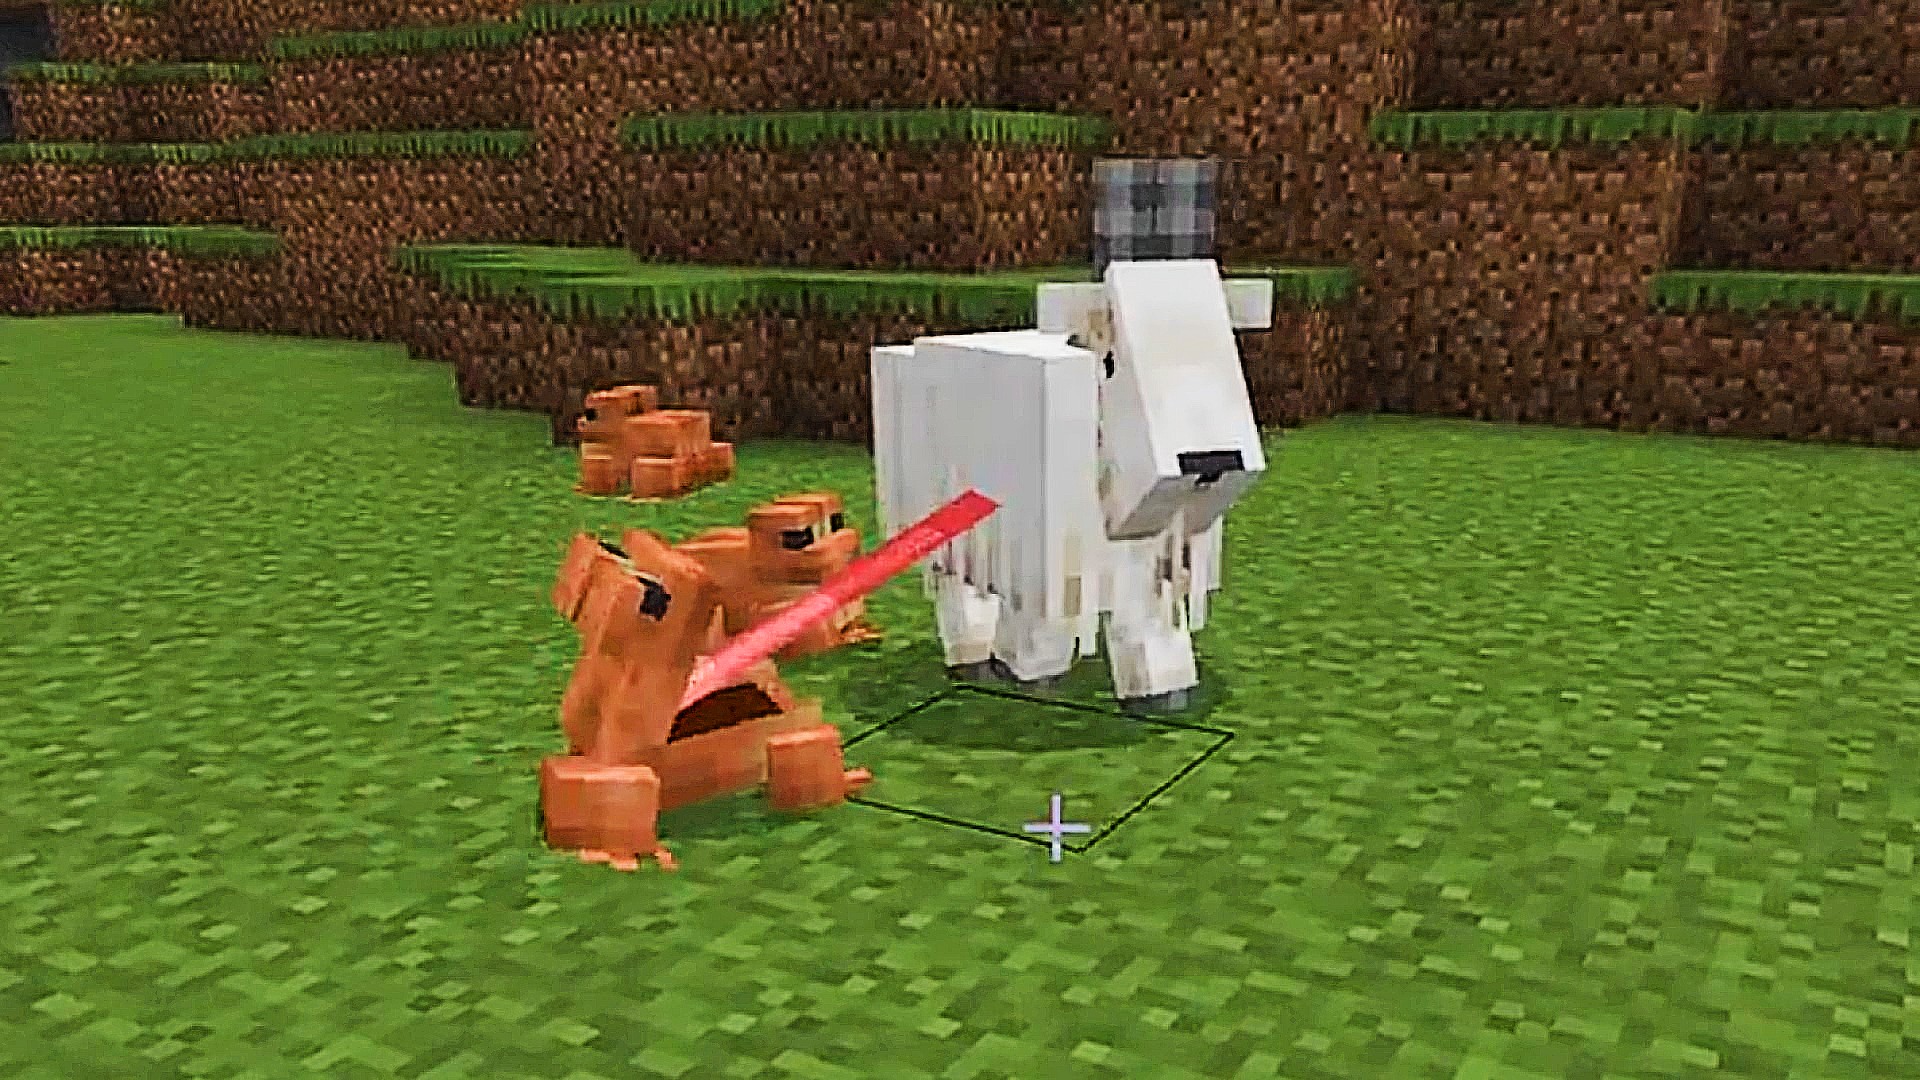 What Does Goat Eat in Minecraft?